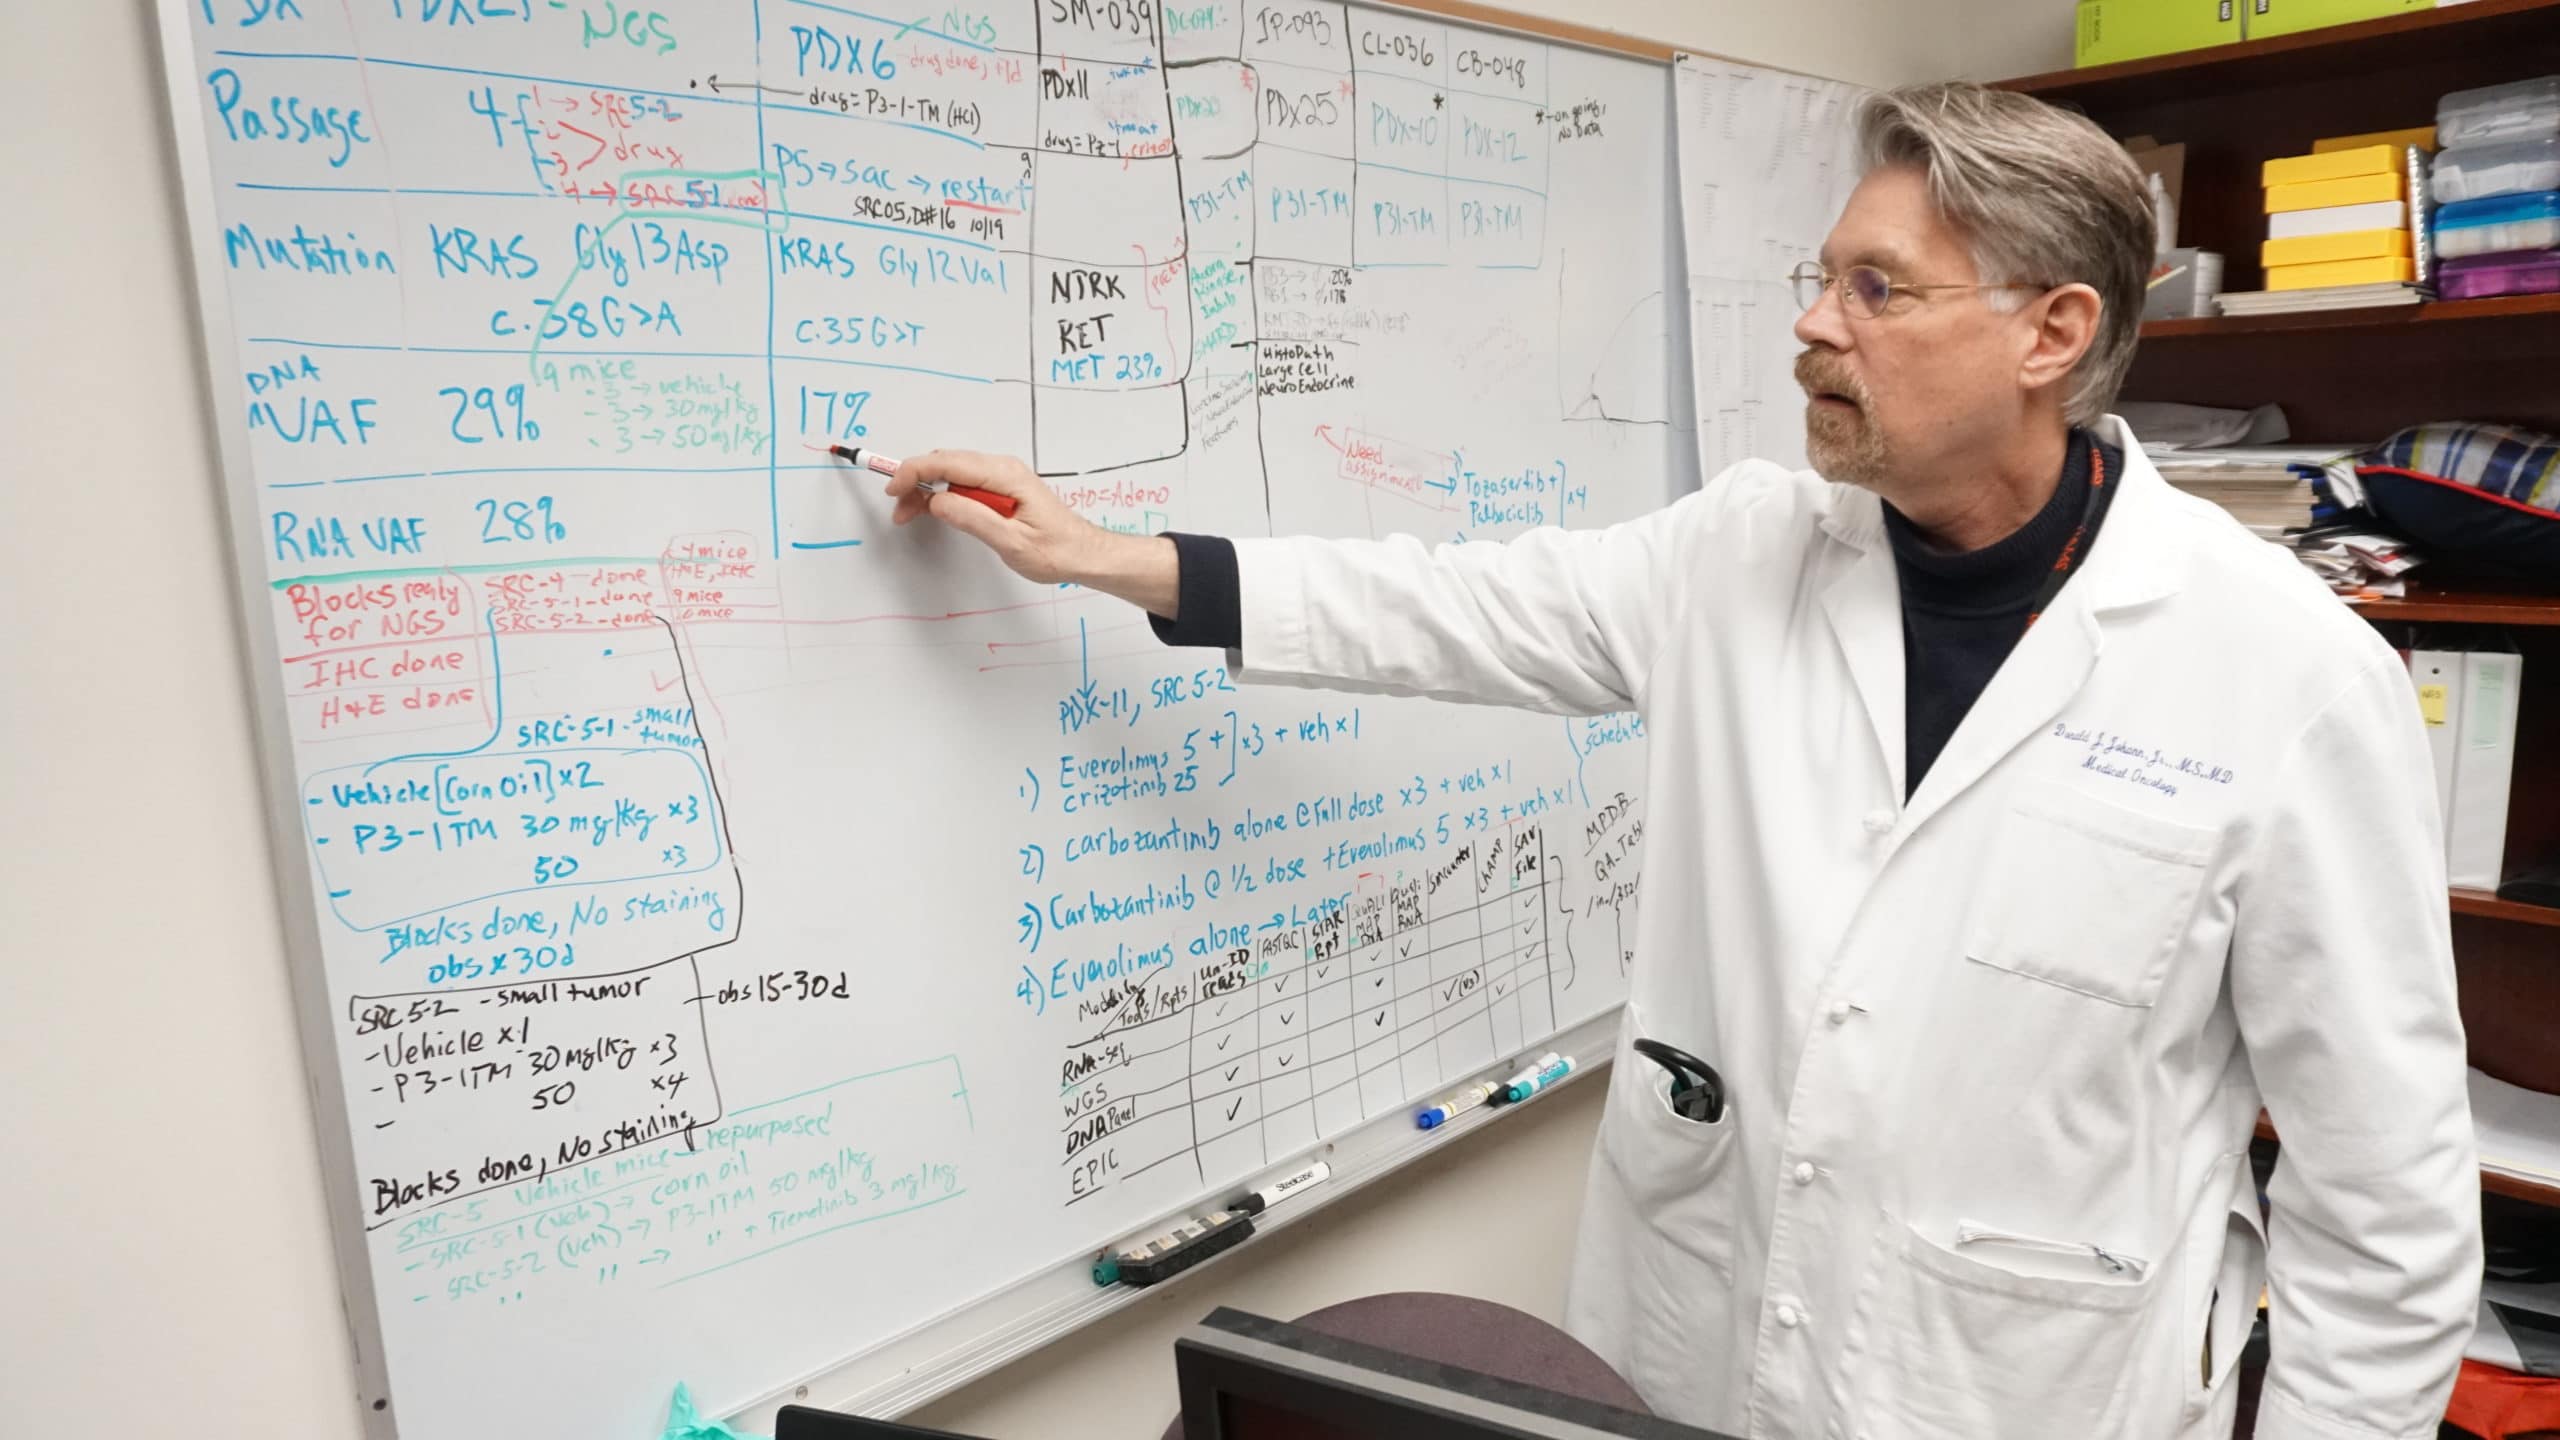 UAMS' Donald Johann Jr., M.D., was part of an international team of researchers that conducted an independent assessment of five commercially-available assays for tumor DNA sequencing. The team's findings were published in the journal Nature Biotechnology.